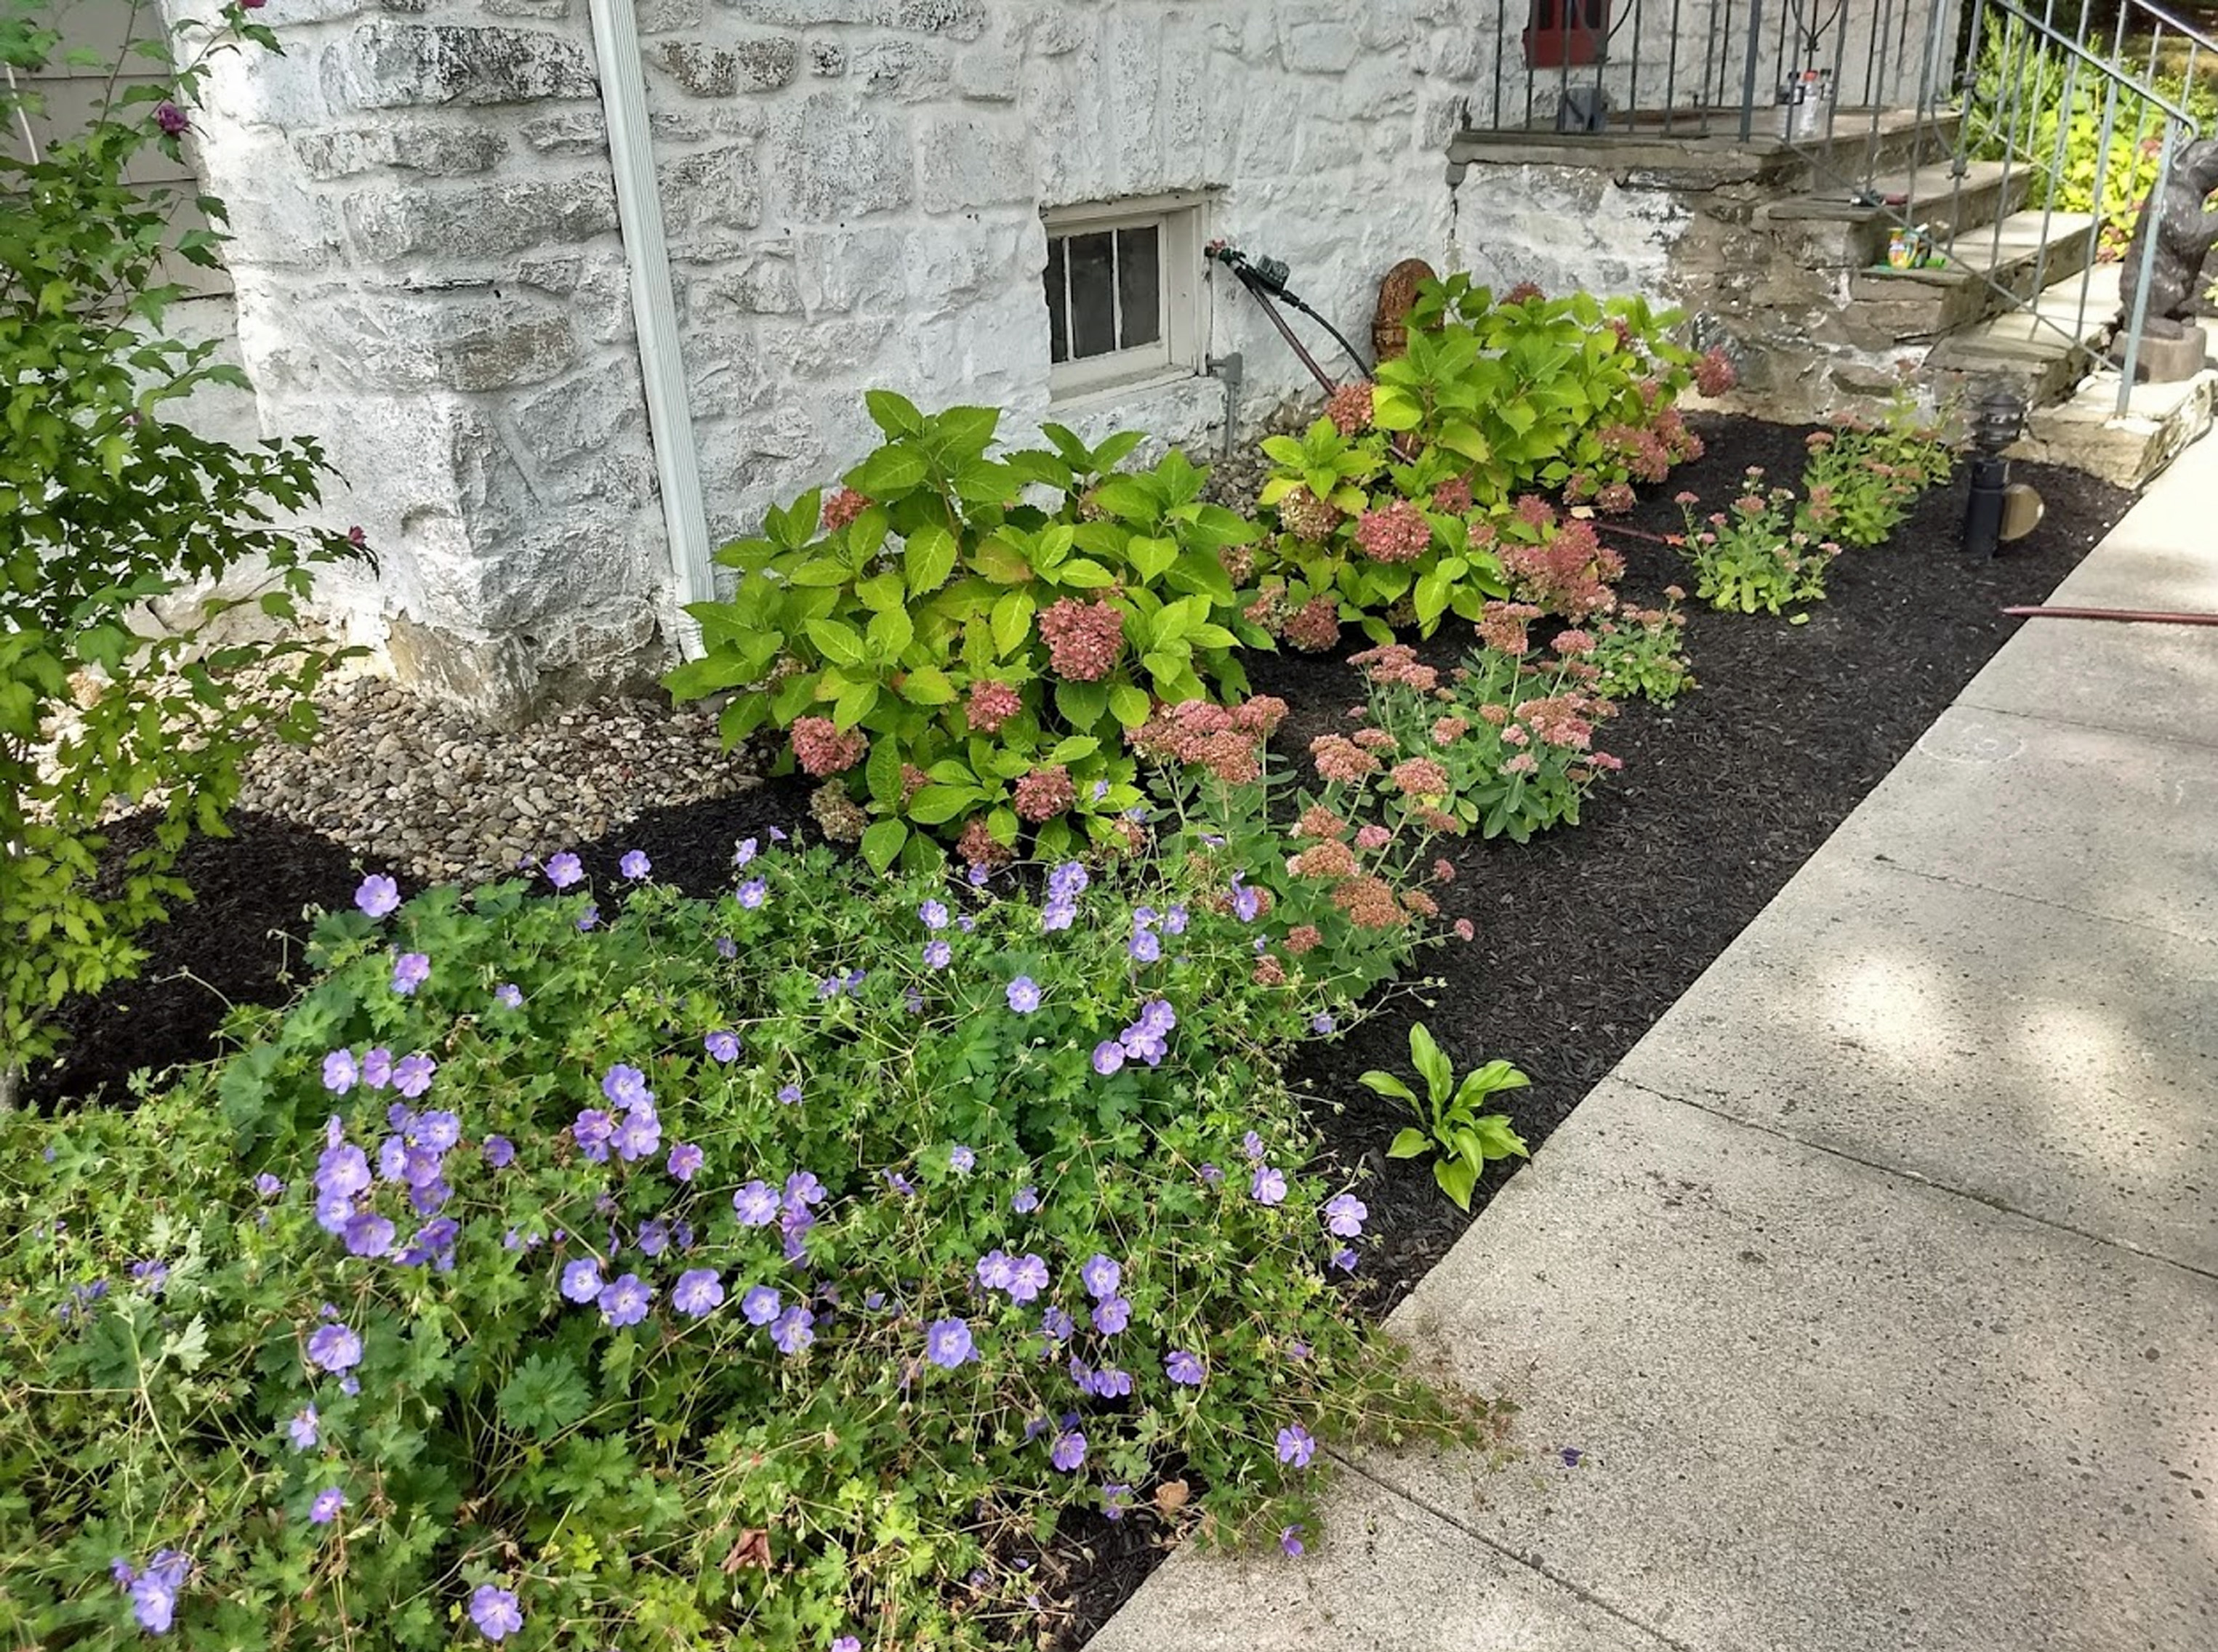 Thumbnail of completed plant bed, along the walkway, with mulch